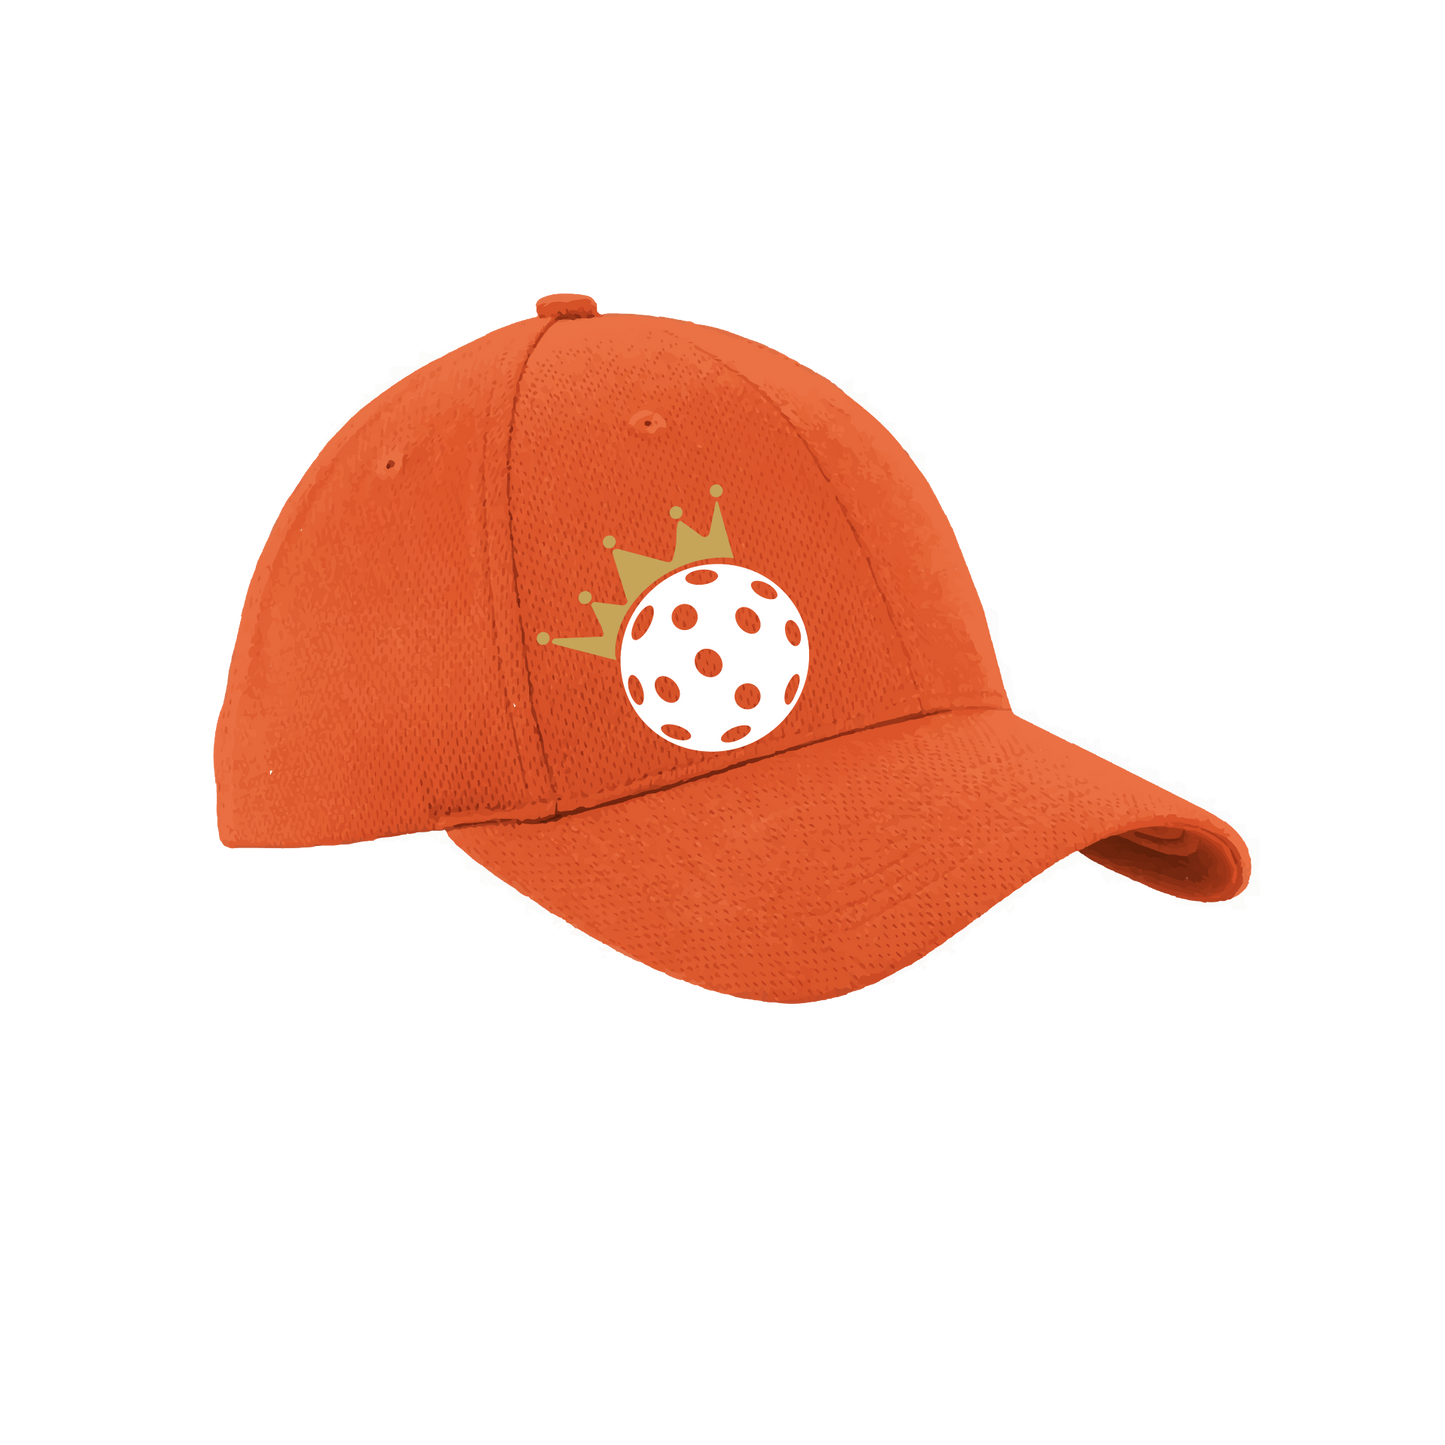 Pickleball Design: Pickleball Queen Crown  Score the winning point and look cute in this pickleball queen crown. Keep the sun out of your eyes and the sweat in check with 100% polyester and PosiCharge Technology. Dial in the perfect fit with the hook-and-loop closure made especially for grownups. Pickleball never looked so good! The UV protection and antimicrobial finish will keep you comfortable and protected on and off the court